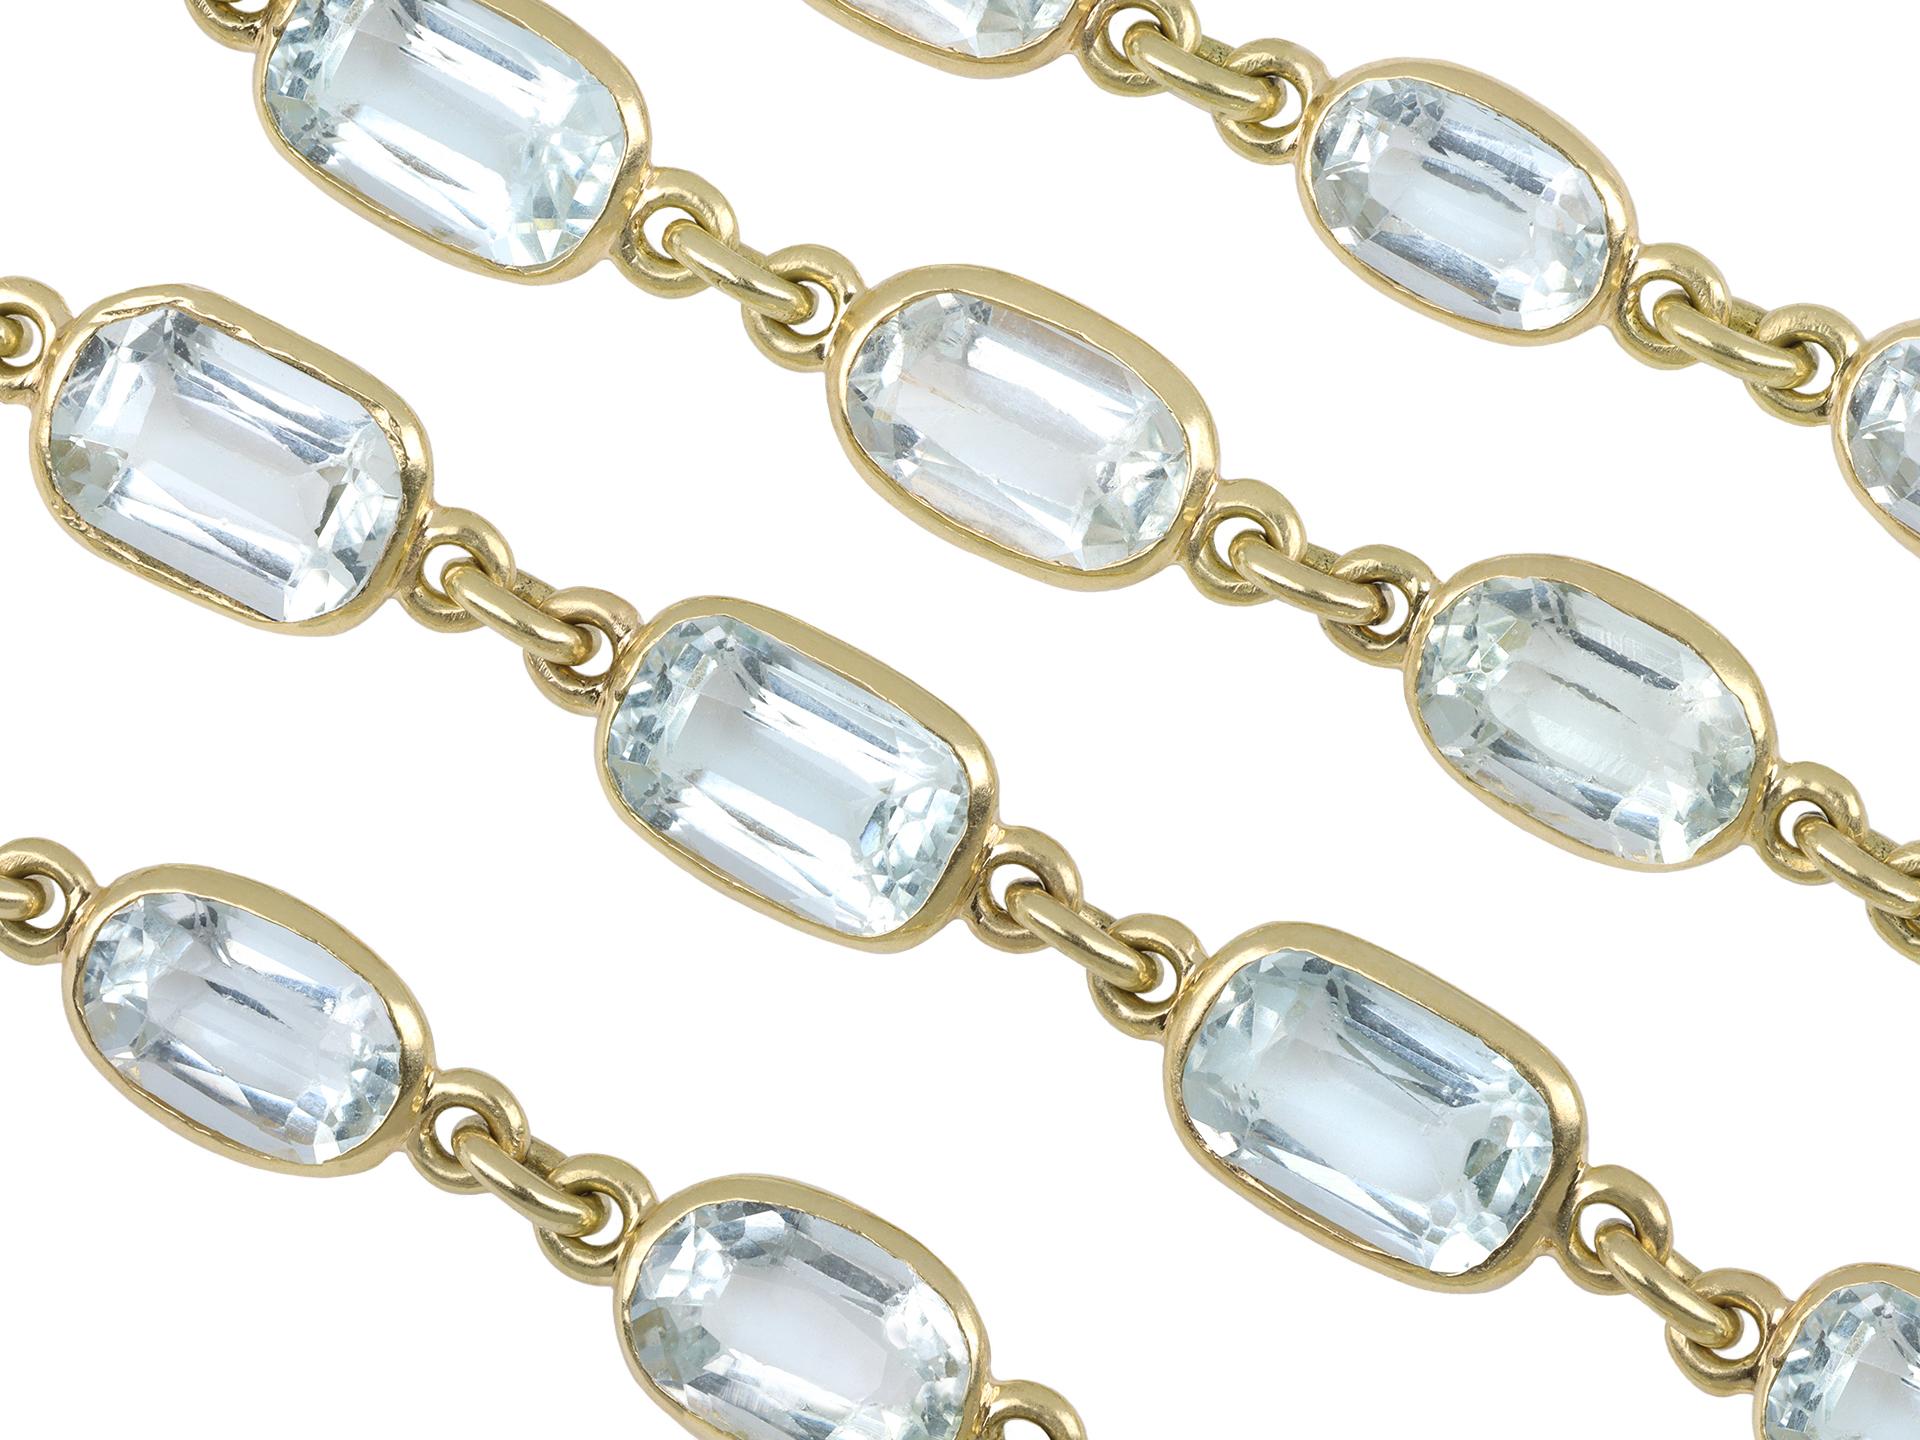 Antique aquamarine necklace. A yellow gold necklace set with one hundred and one cushion shape old cut natural aquamarines in open back spectacle settings with a combined approximate weight of 65.50 carats, to an elegant long guard trace chain,